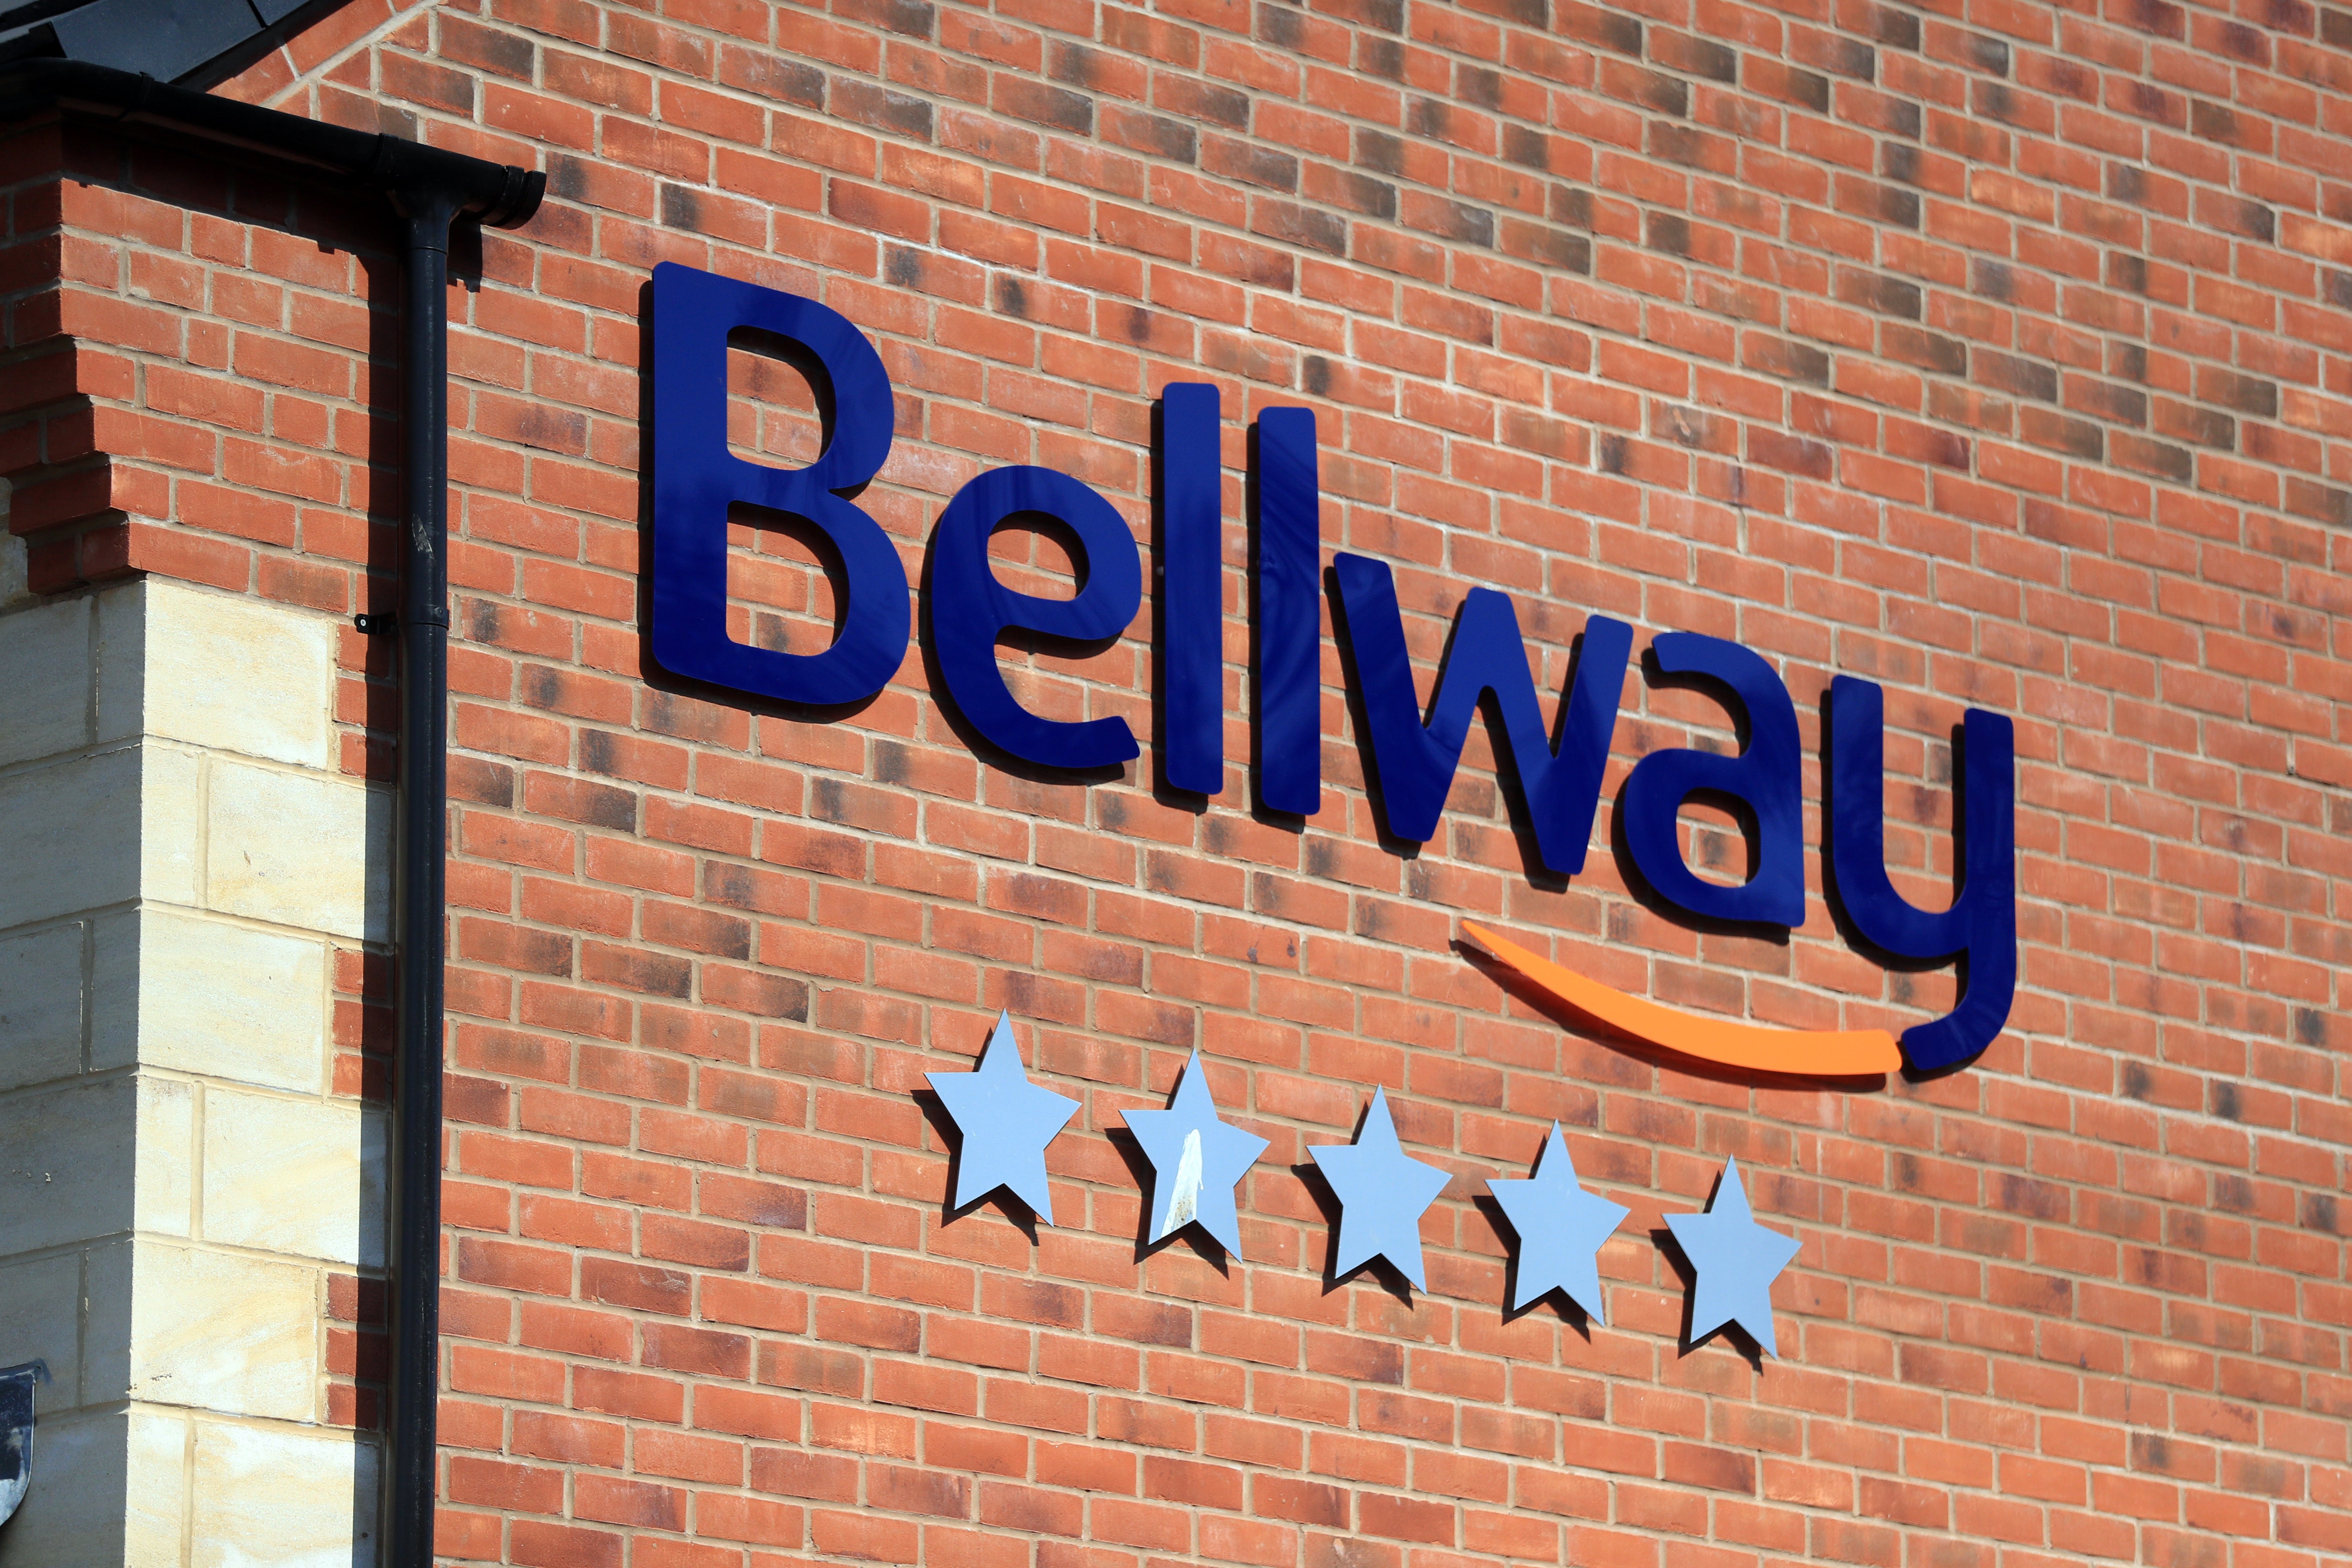 Housebuilder Bellway has notched up record half-year housing revenues but cut its outlook for property selling prices over the year ahead (Mike Egerton/PA)